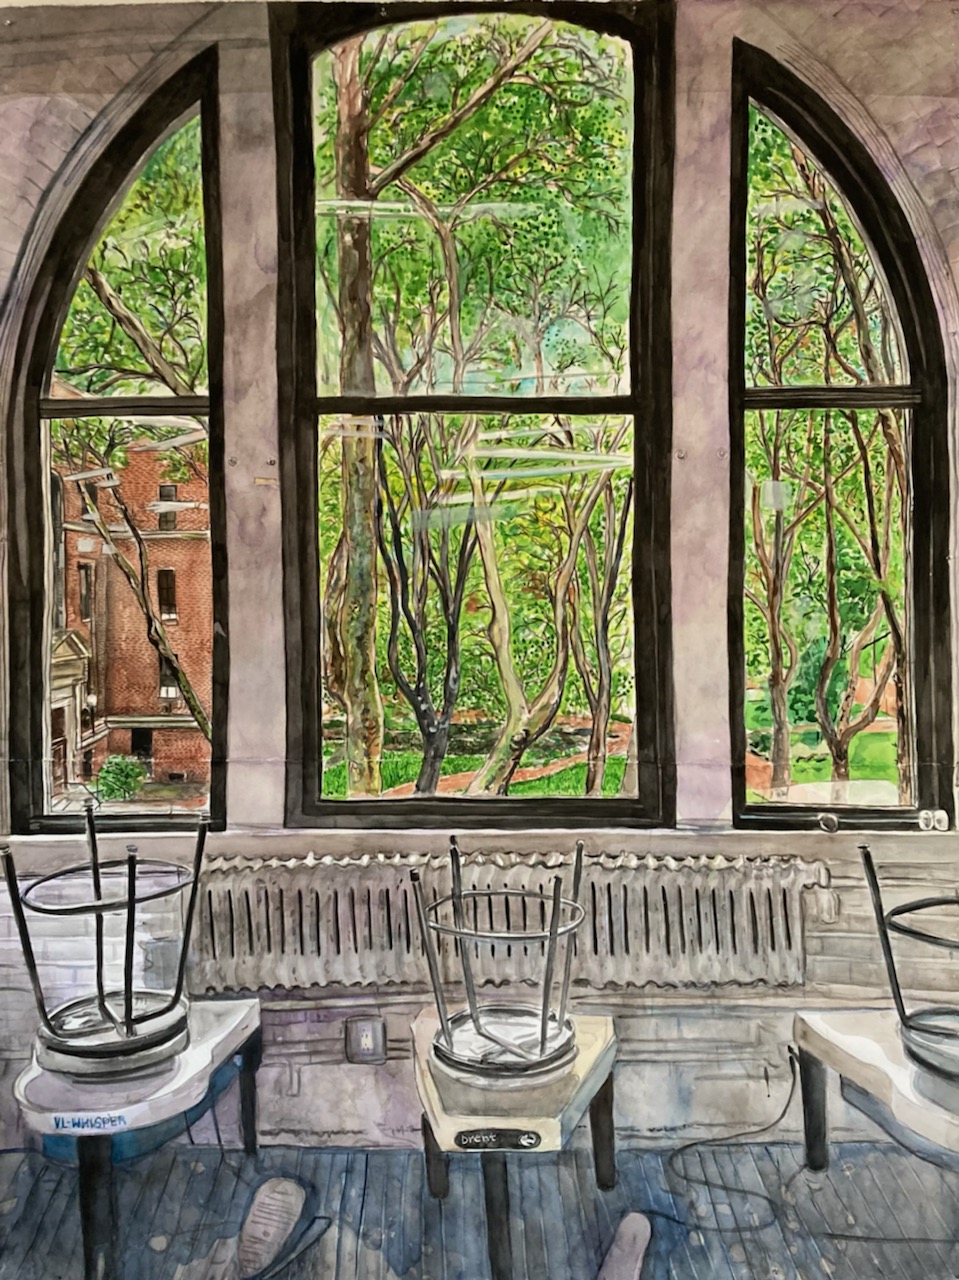 Watercolor painting of the inside of a ceramics studio with a large arched window that has trees on the outside.